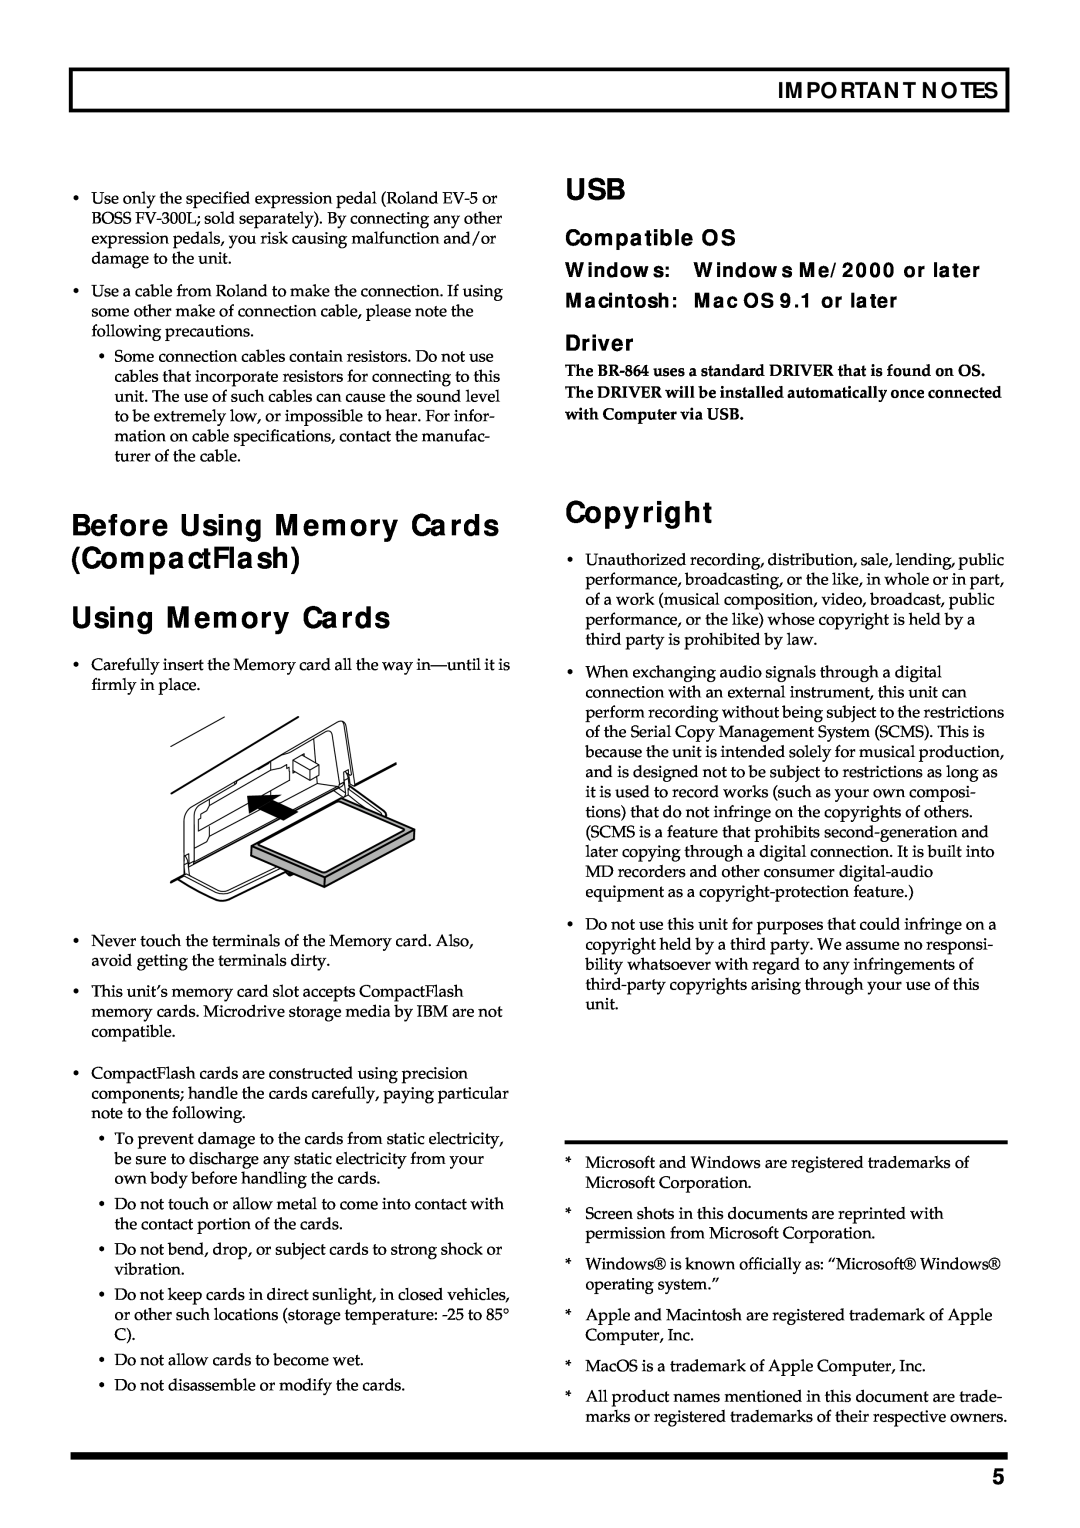 Roland BR-864 owner manual Before Using Memory Cards CompactFlash, Copyright, Windows: Windows Me/2000 or later 